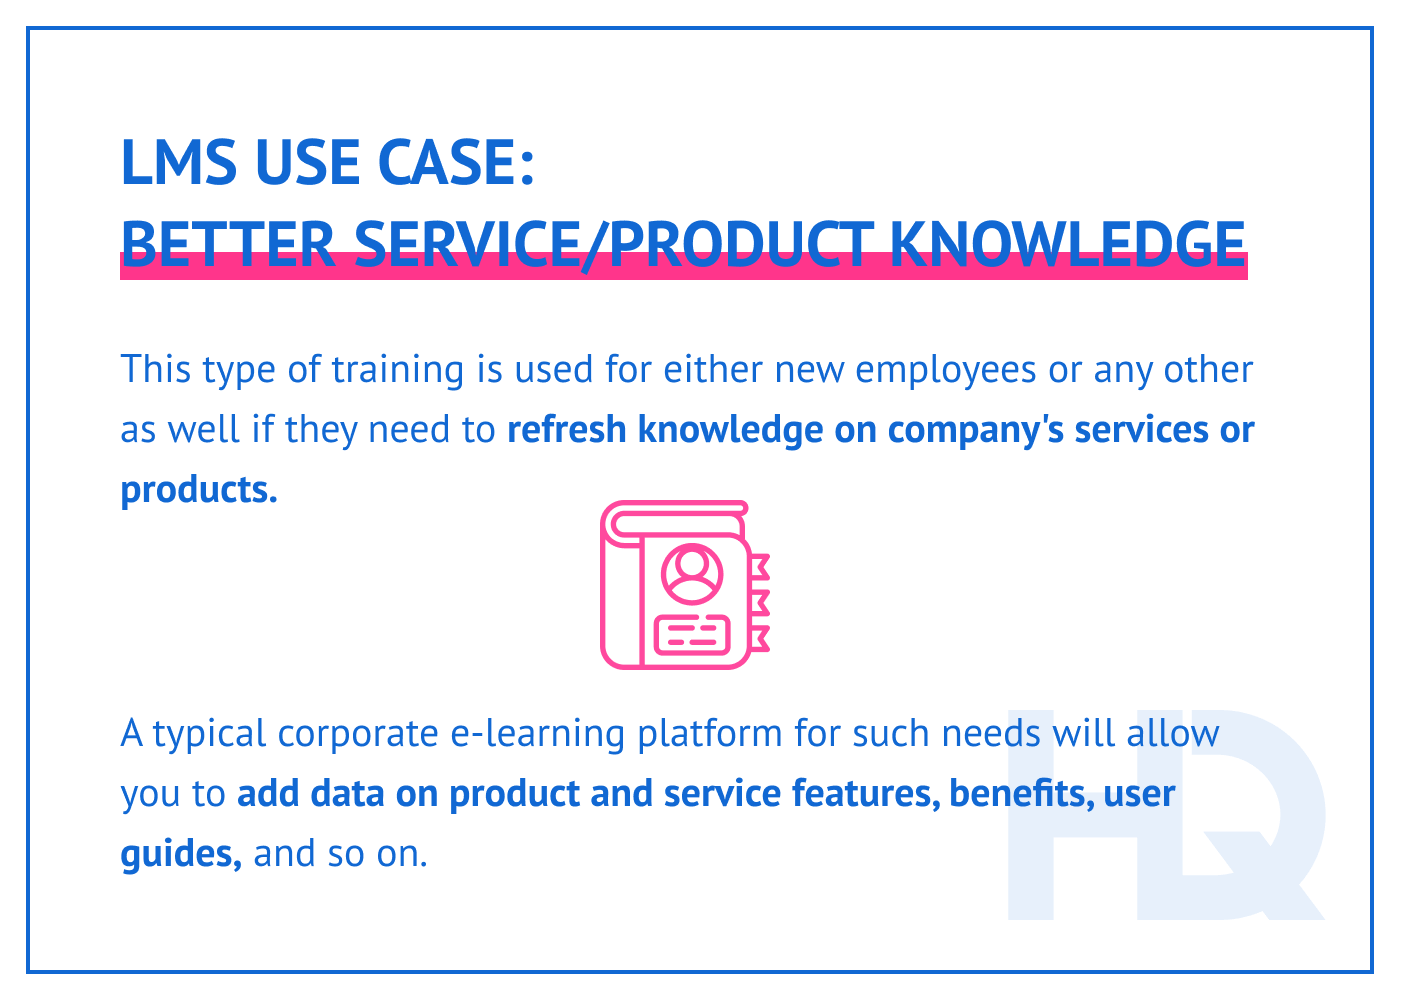 LMS use case better service or product knowledge